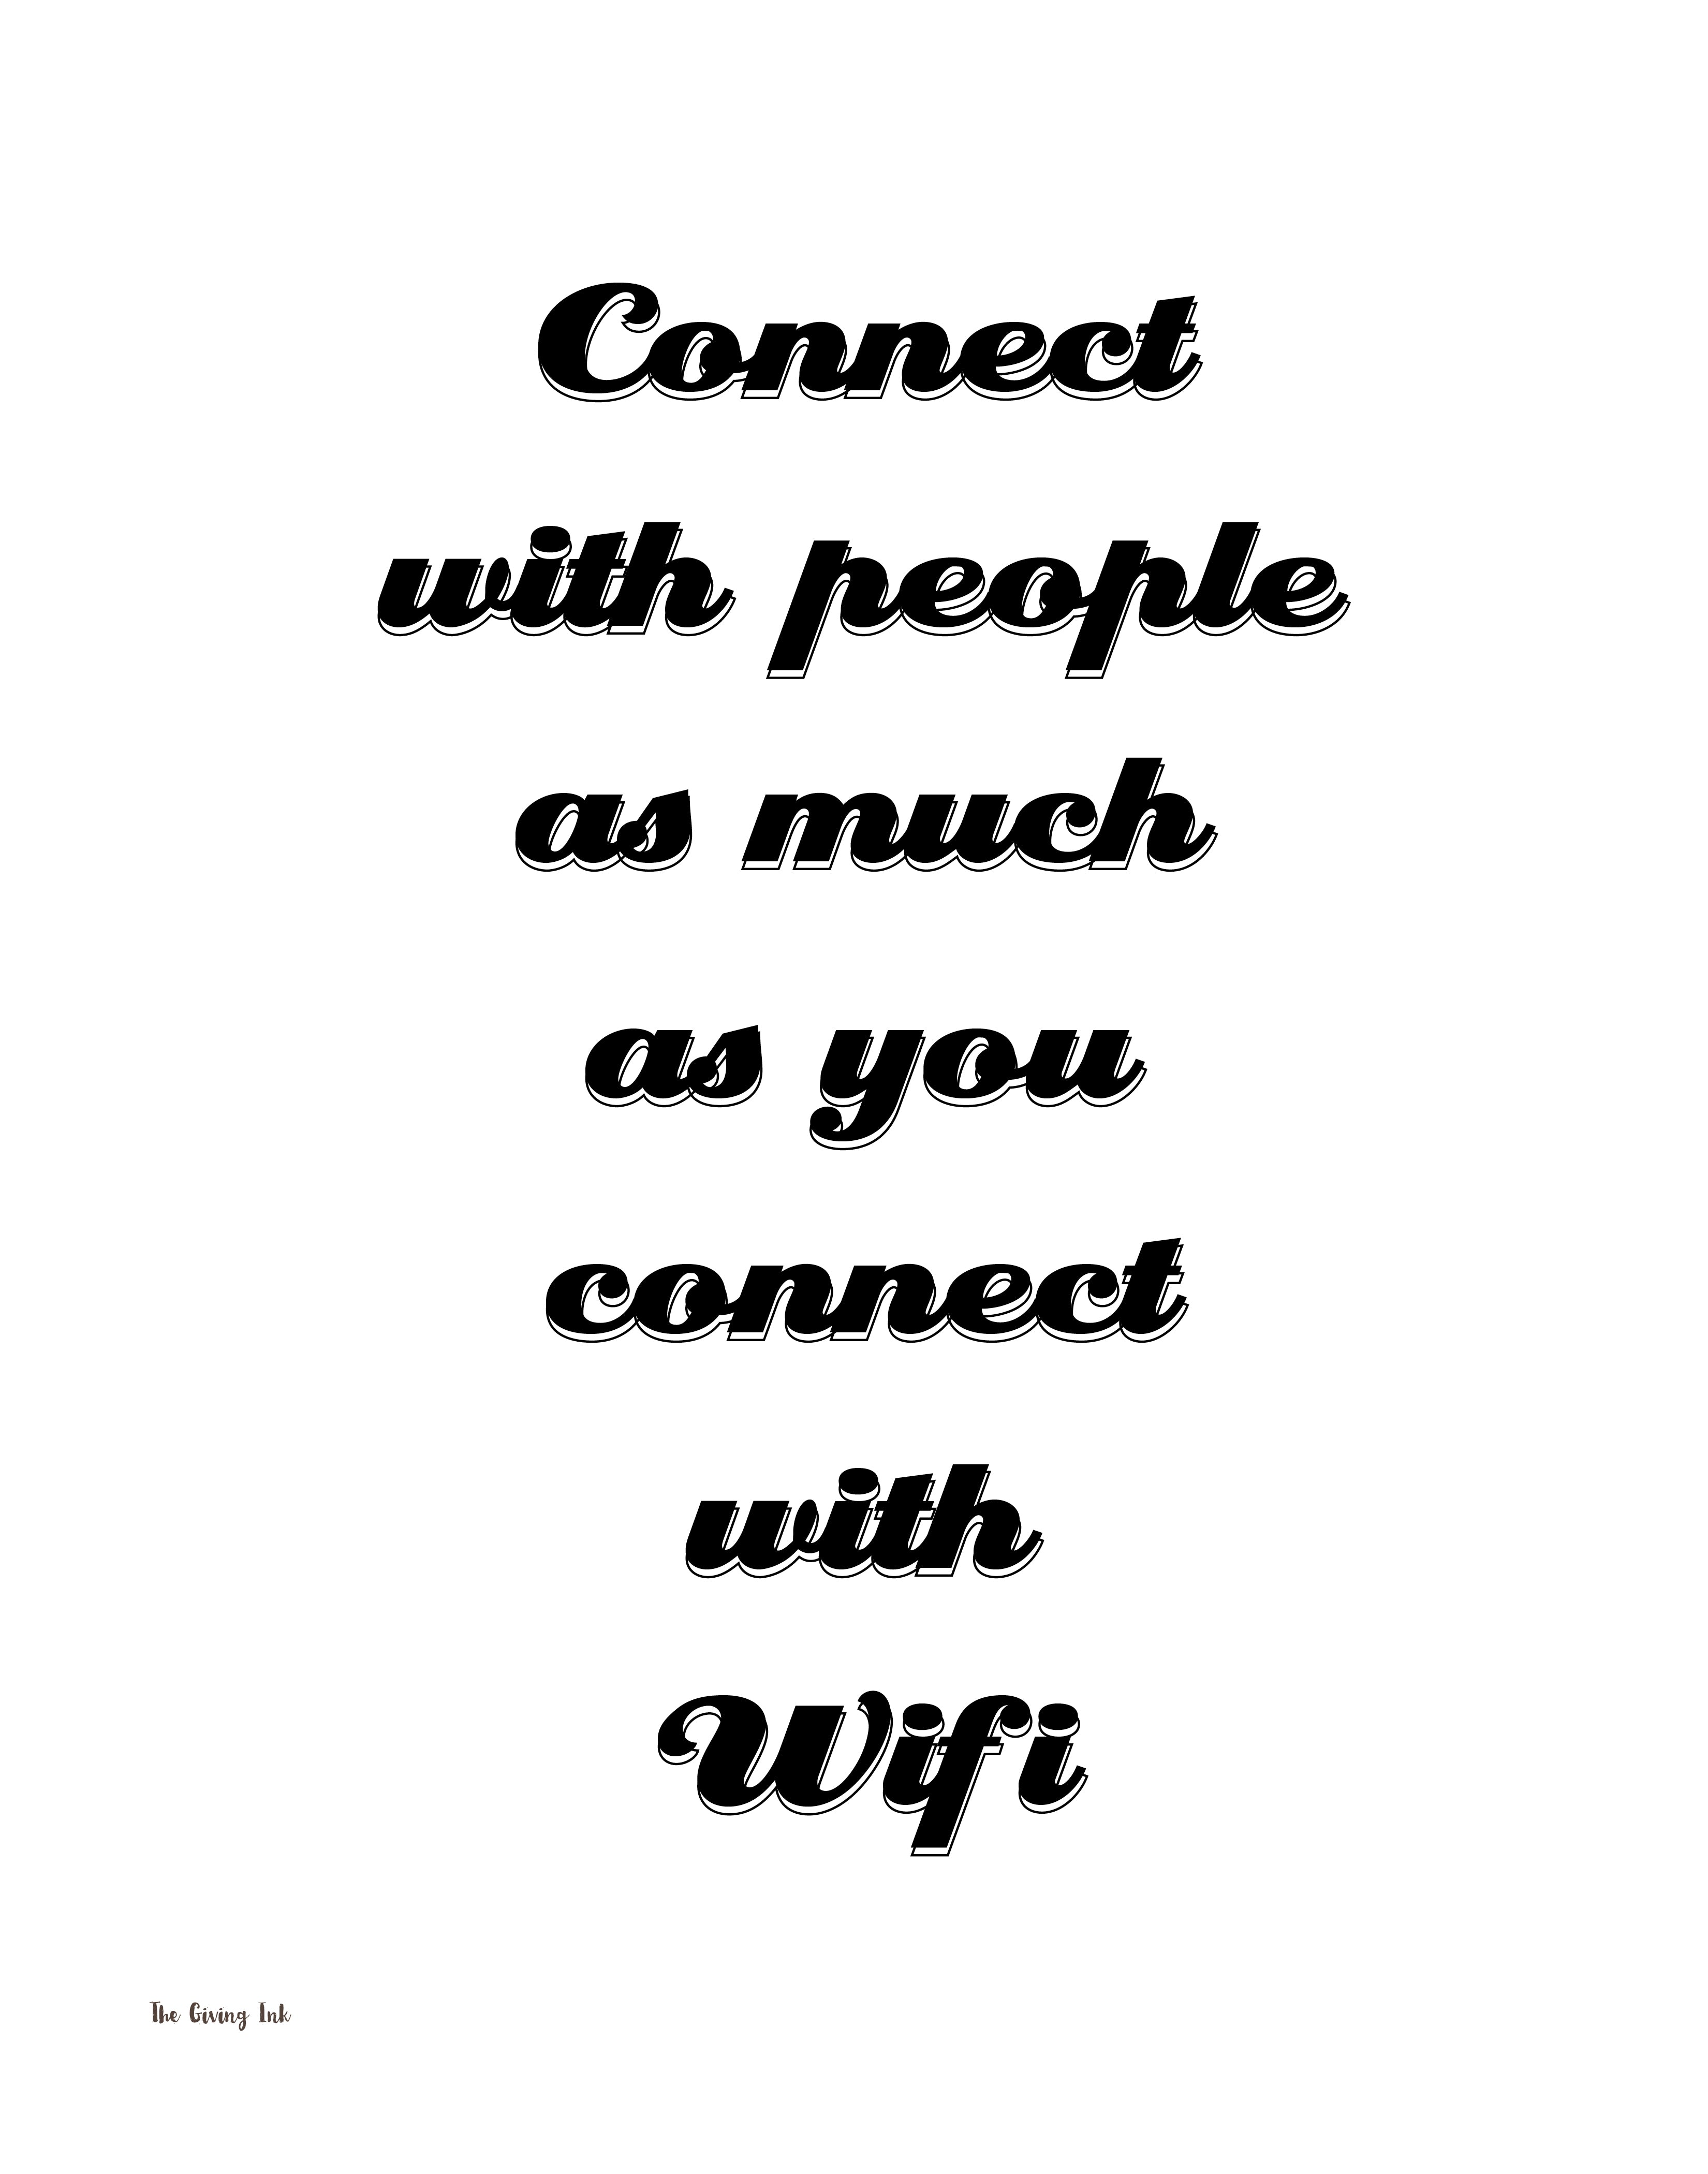 Connect With People Downloadable Print